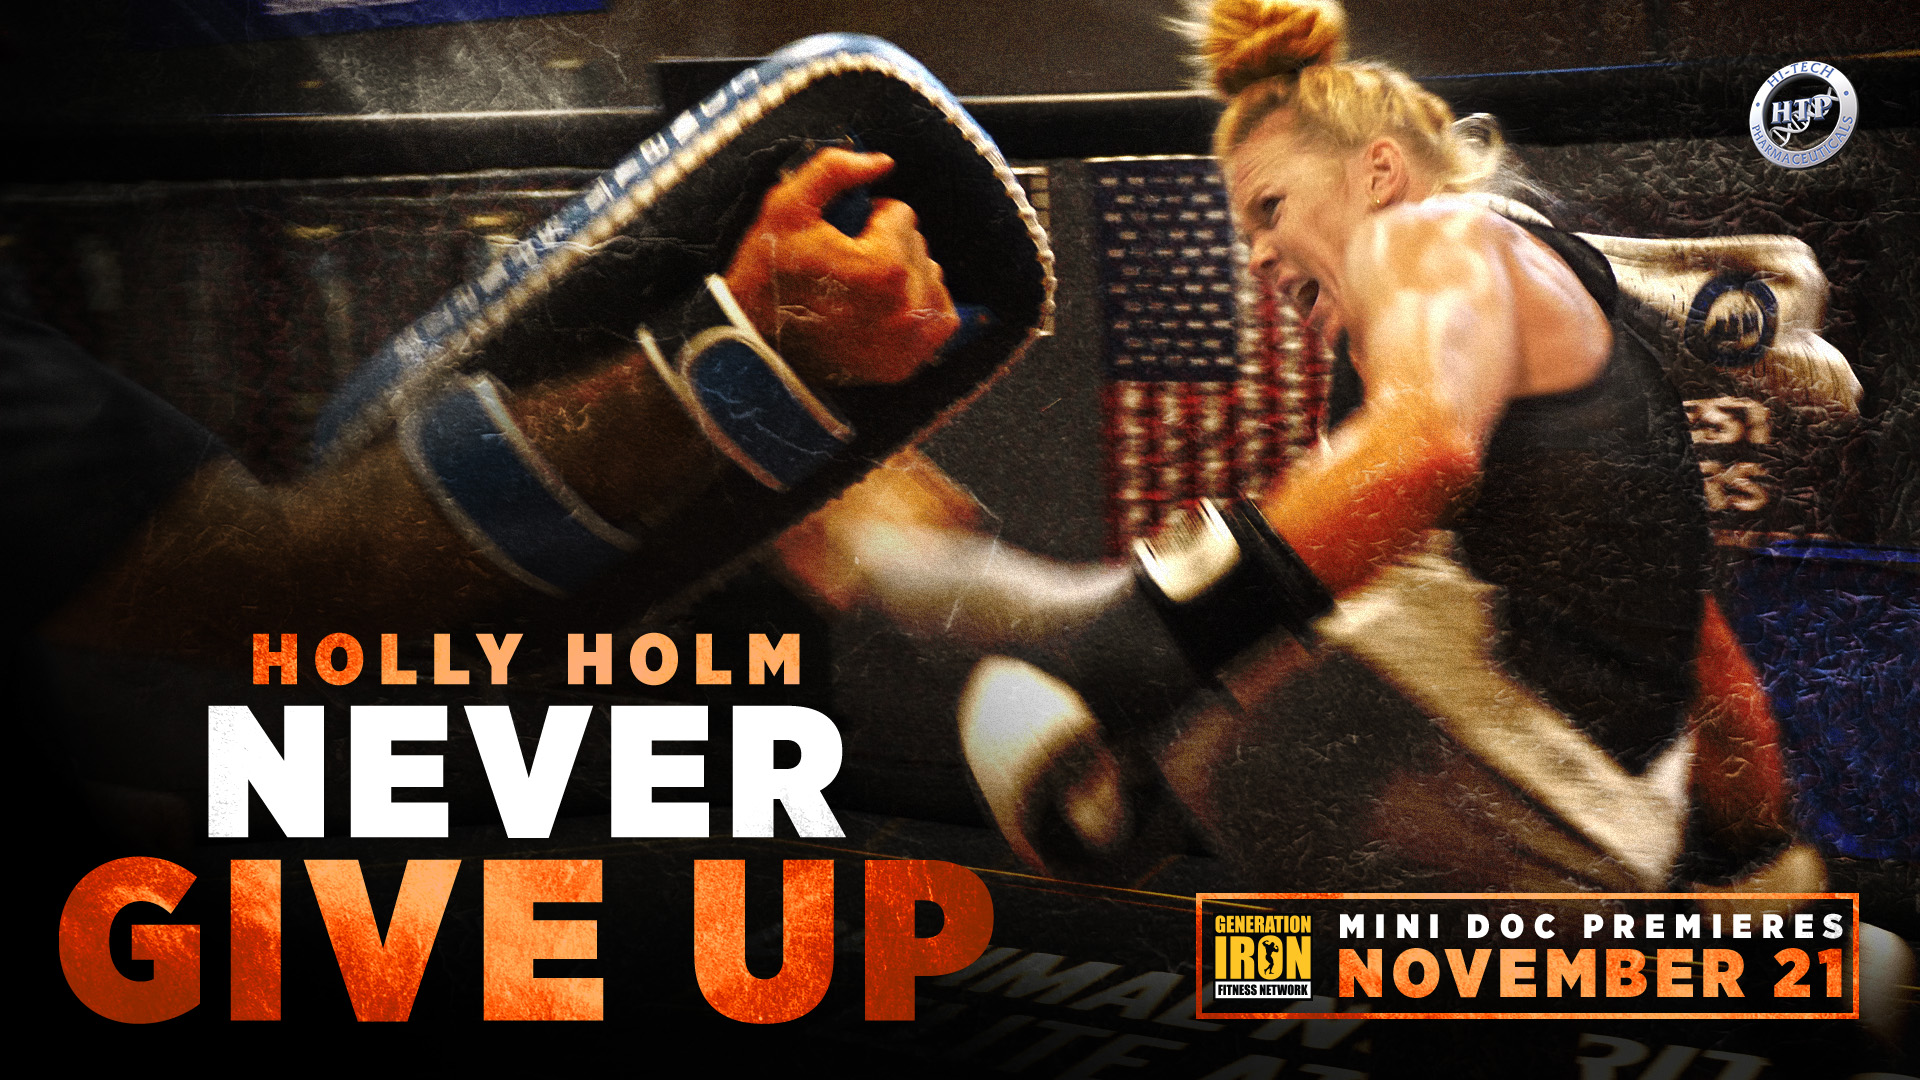 Holly Holm Never Give Up Poster Generation Iron